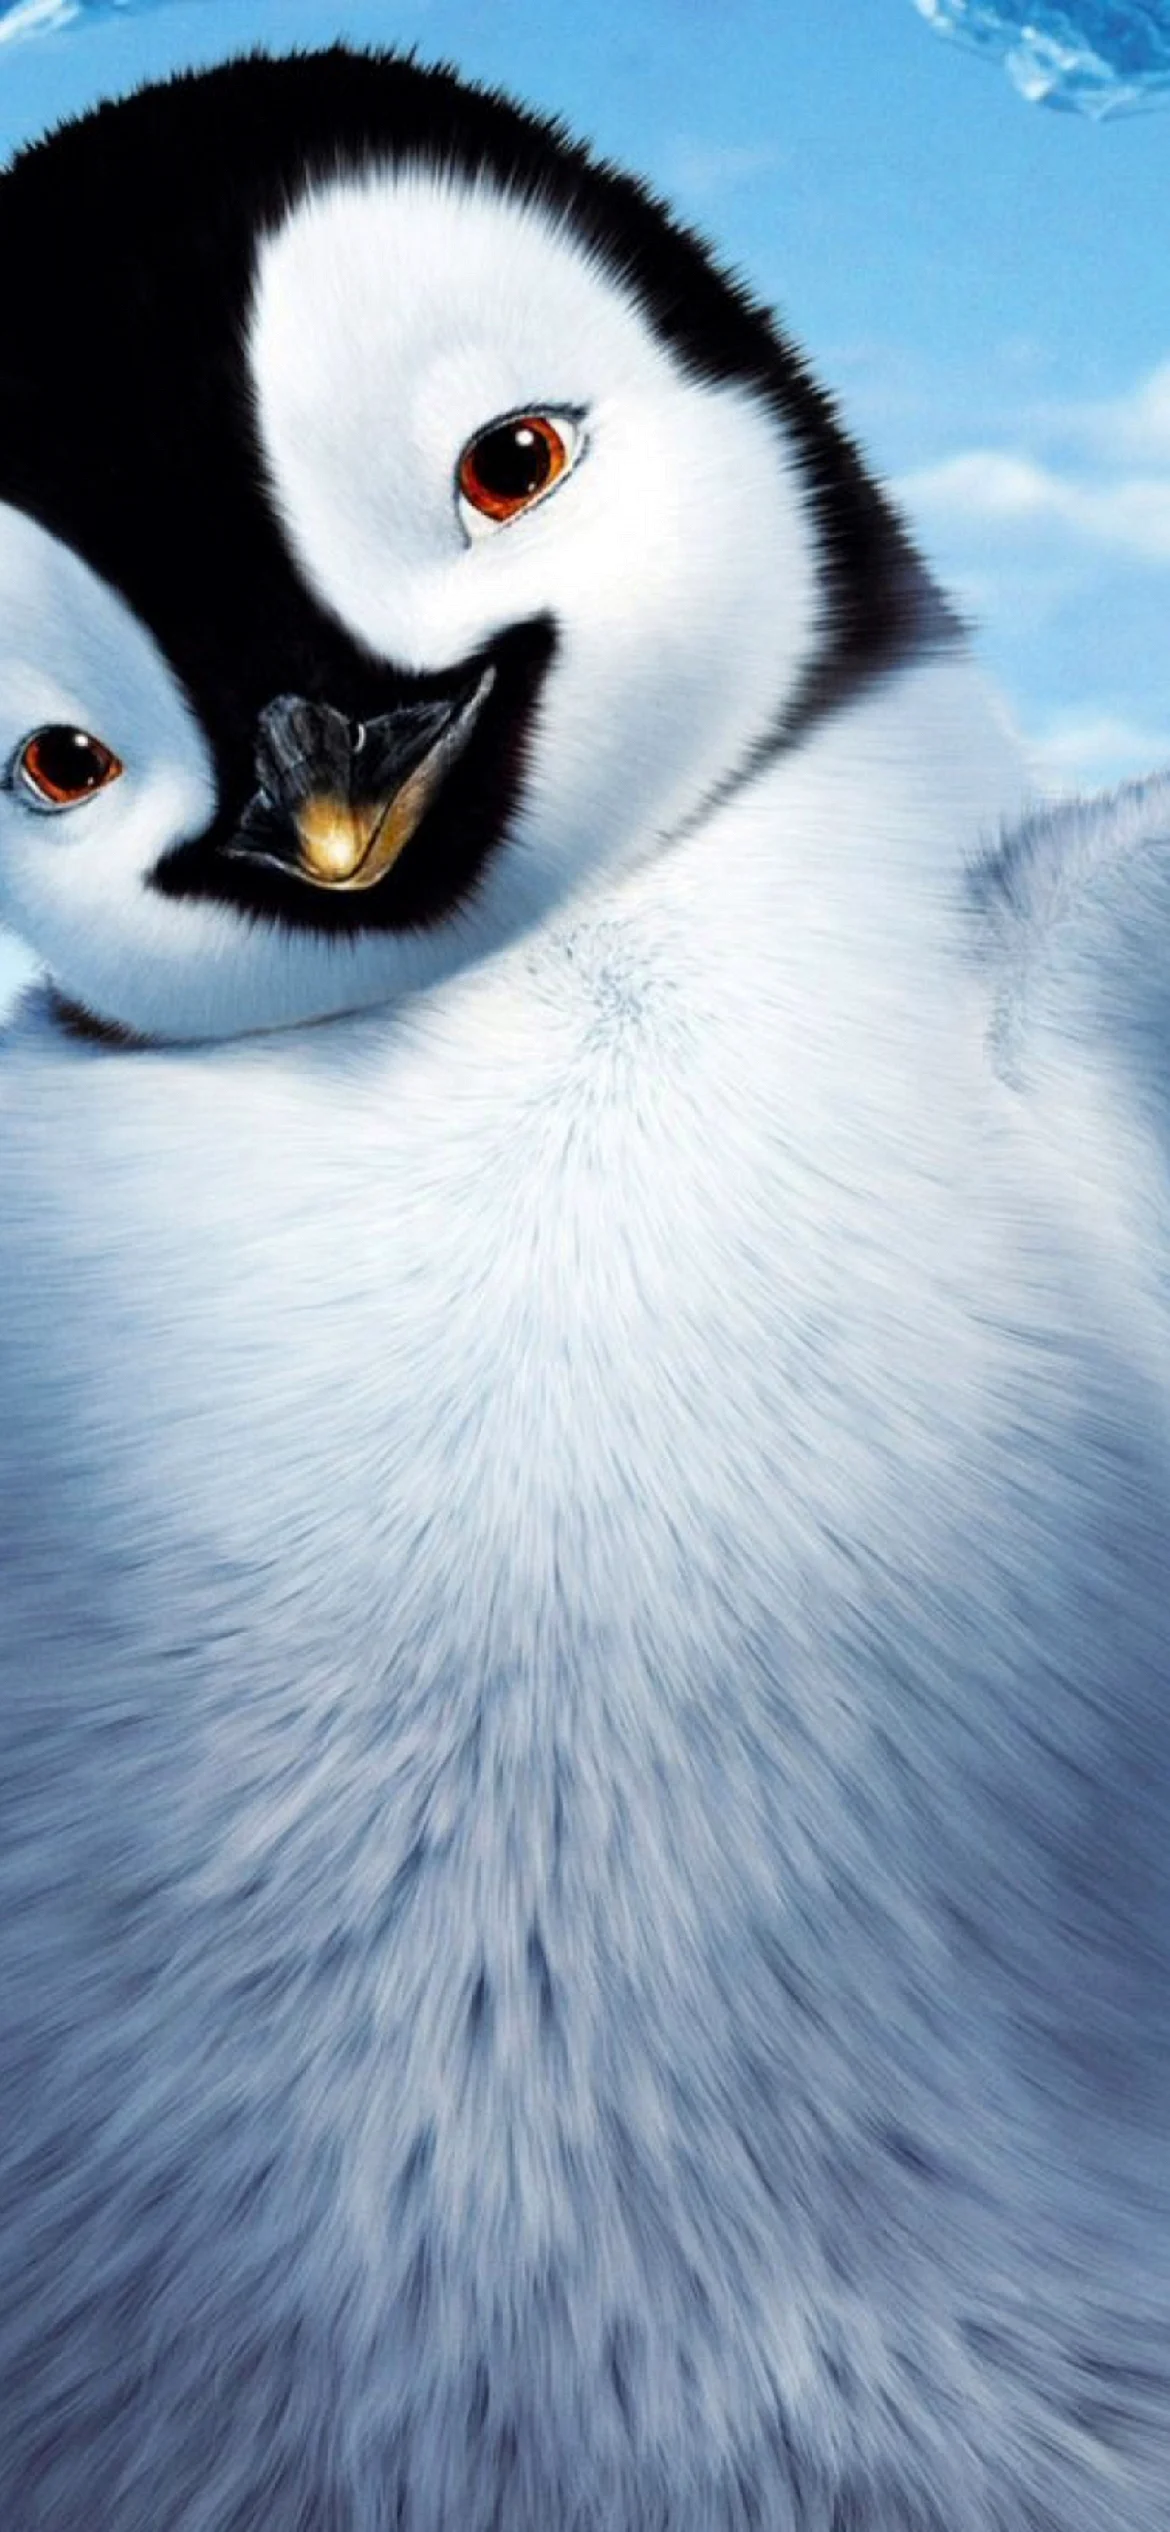 Happy Feet 2 Wallpaper for iPhone 14